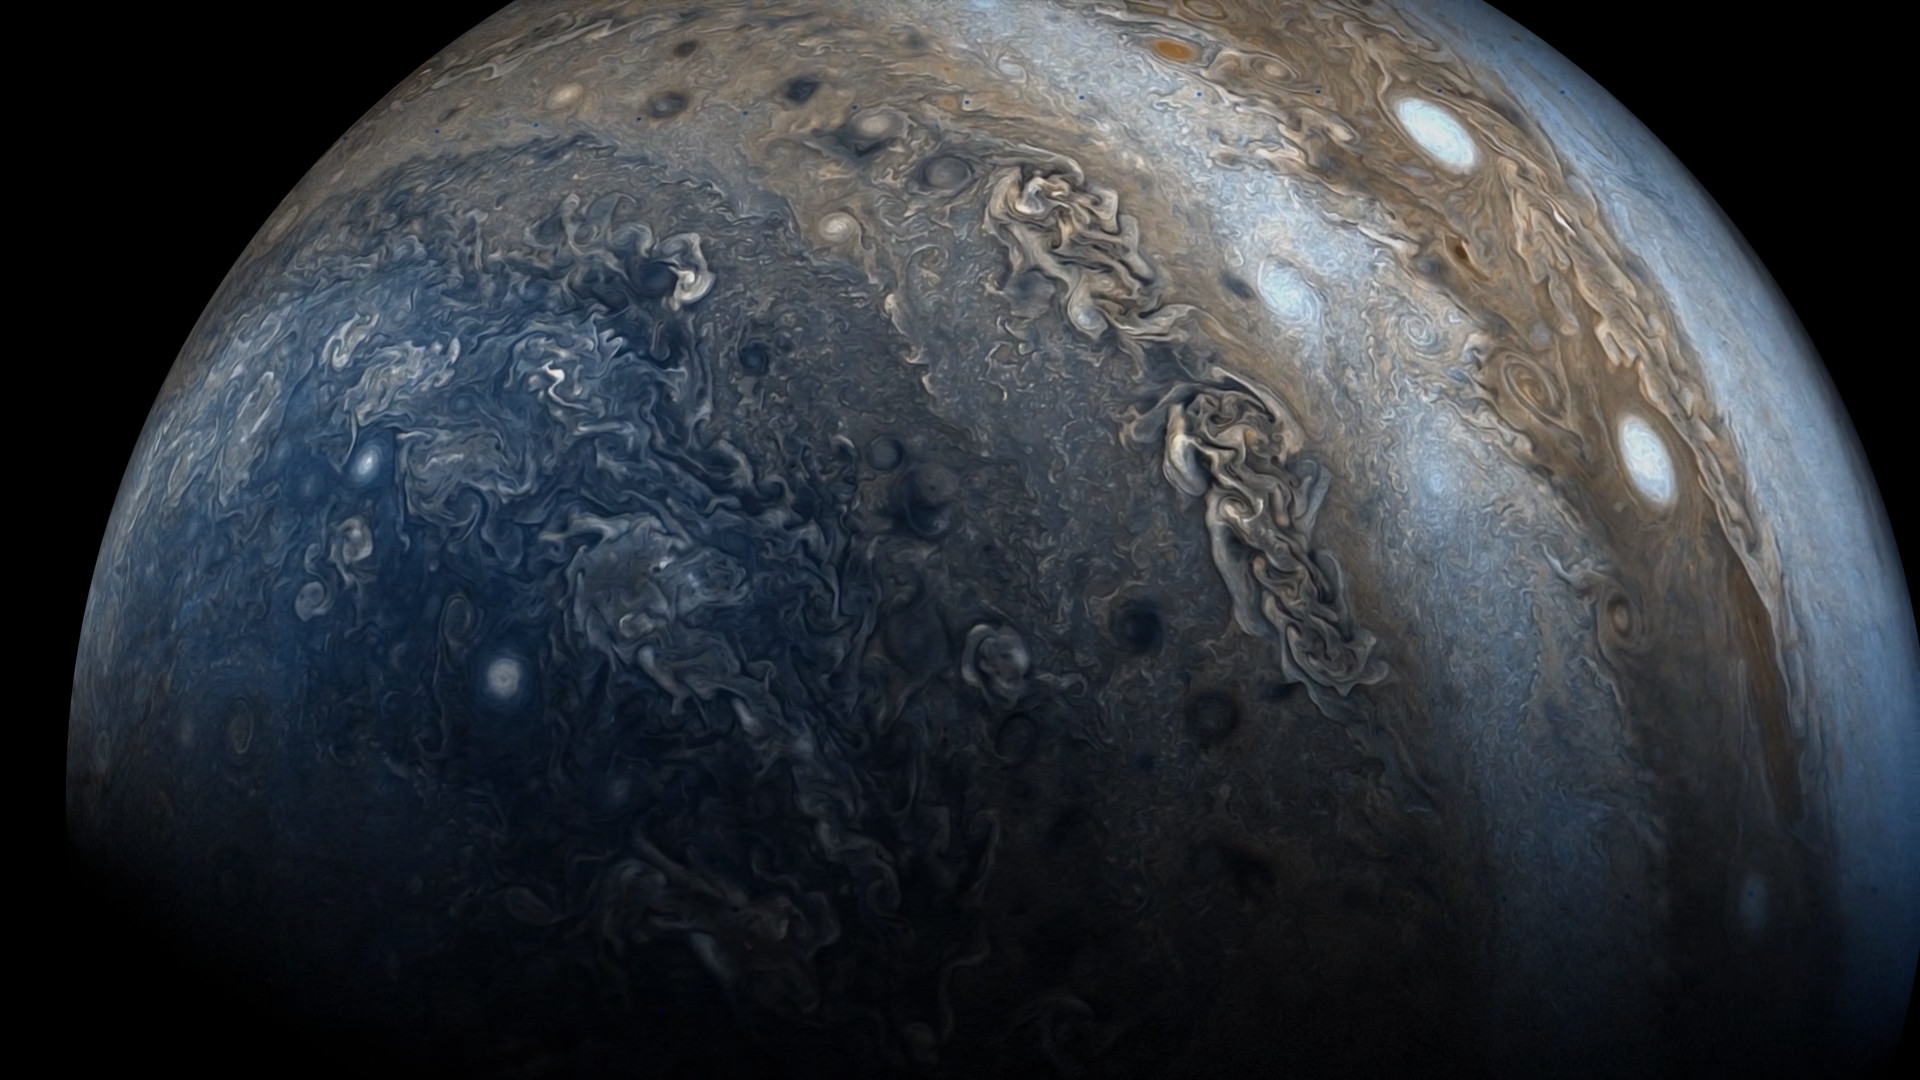 1920x1080 Wallpapers of Jupiter (From the Juno Perijove 06 Flyby) (i.redd.it)